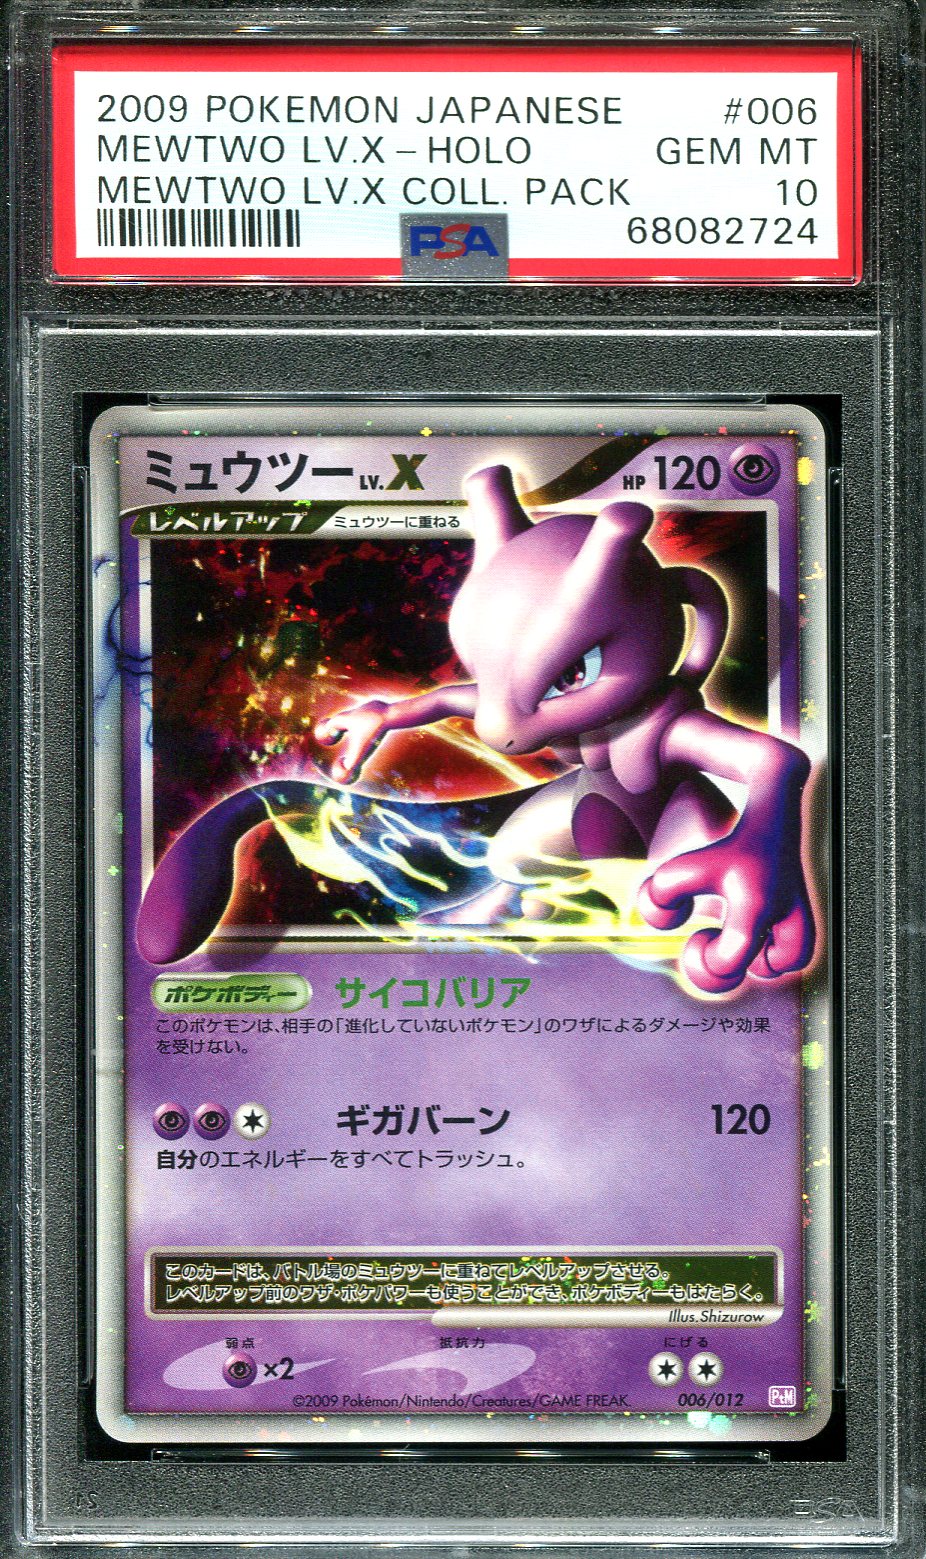 PSA 10 Mewtwo LV.X Holo Collection pack Promo Ptm Japanese Pokemon Card